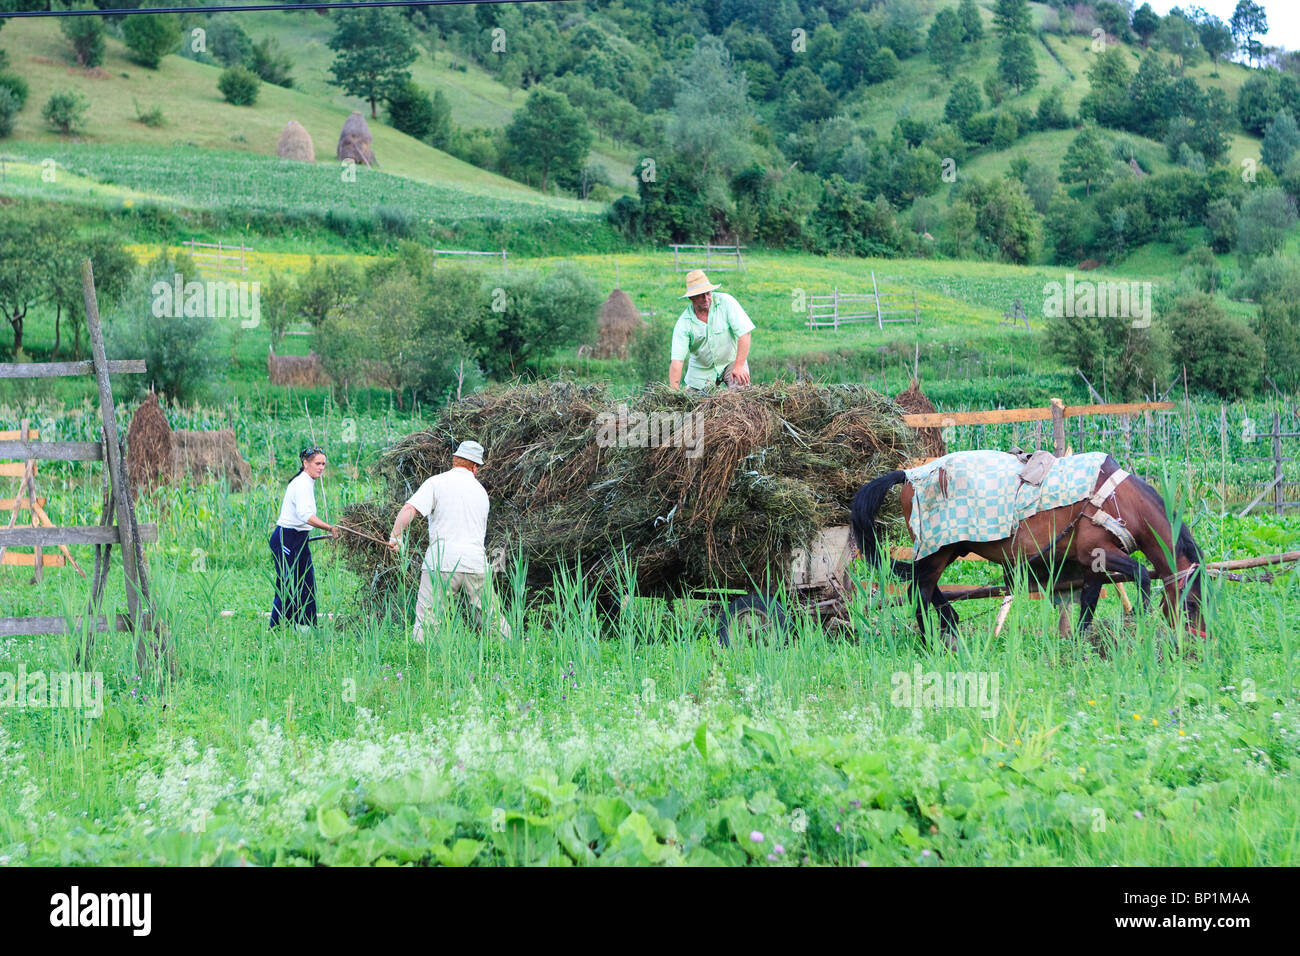 Villagers working on the field in the village of Poienile Izei (in Maramures county), Romania. Stock Photo